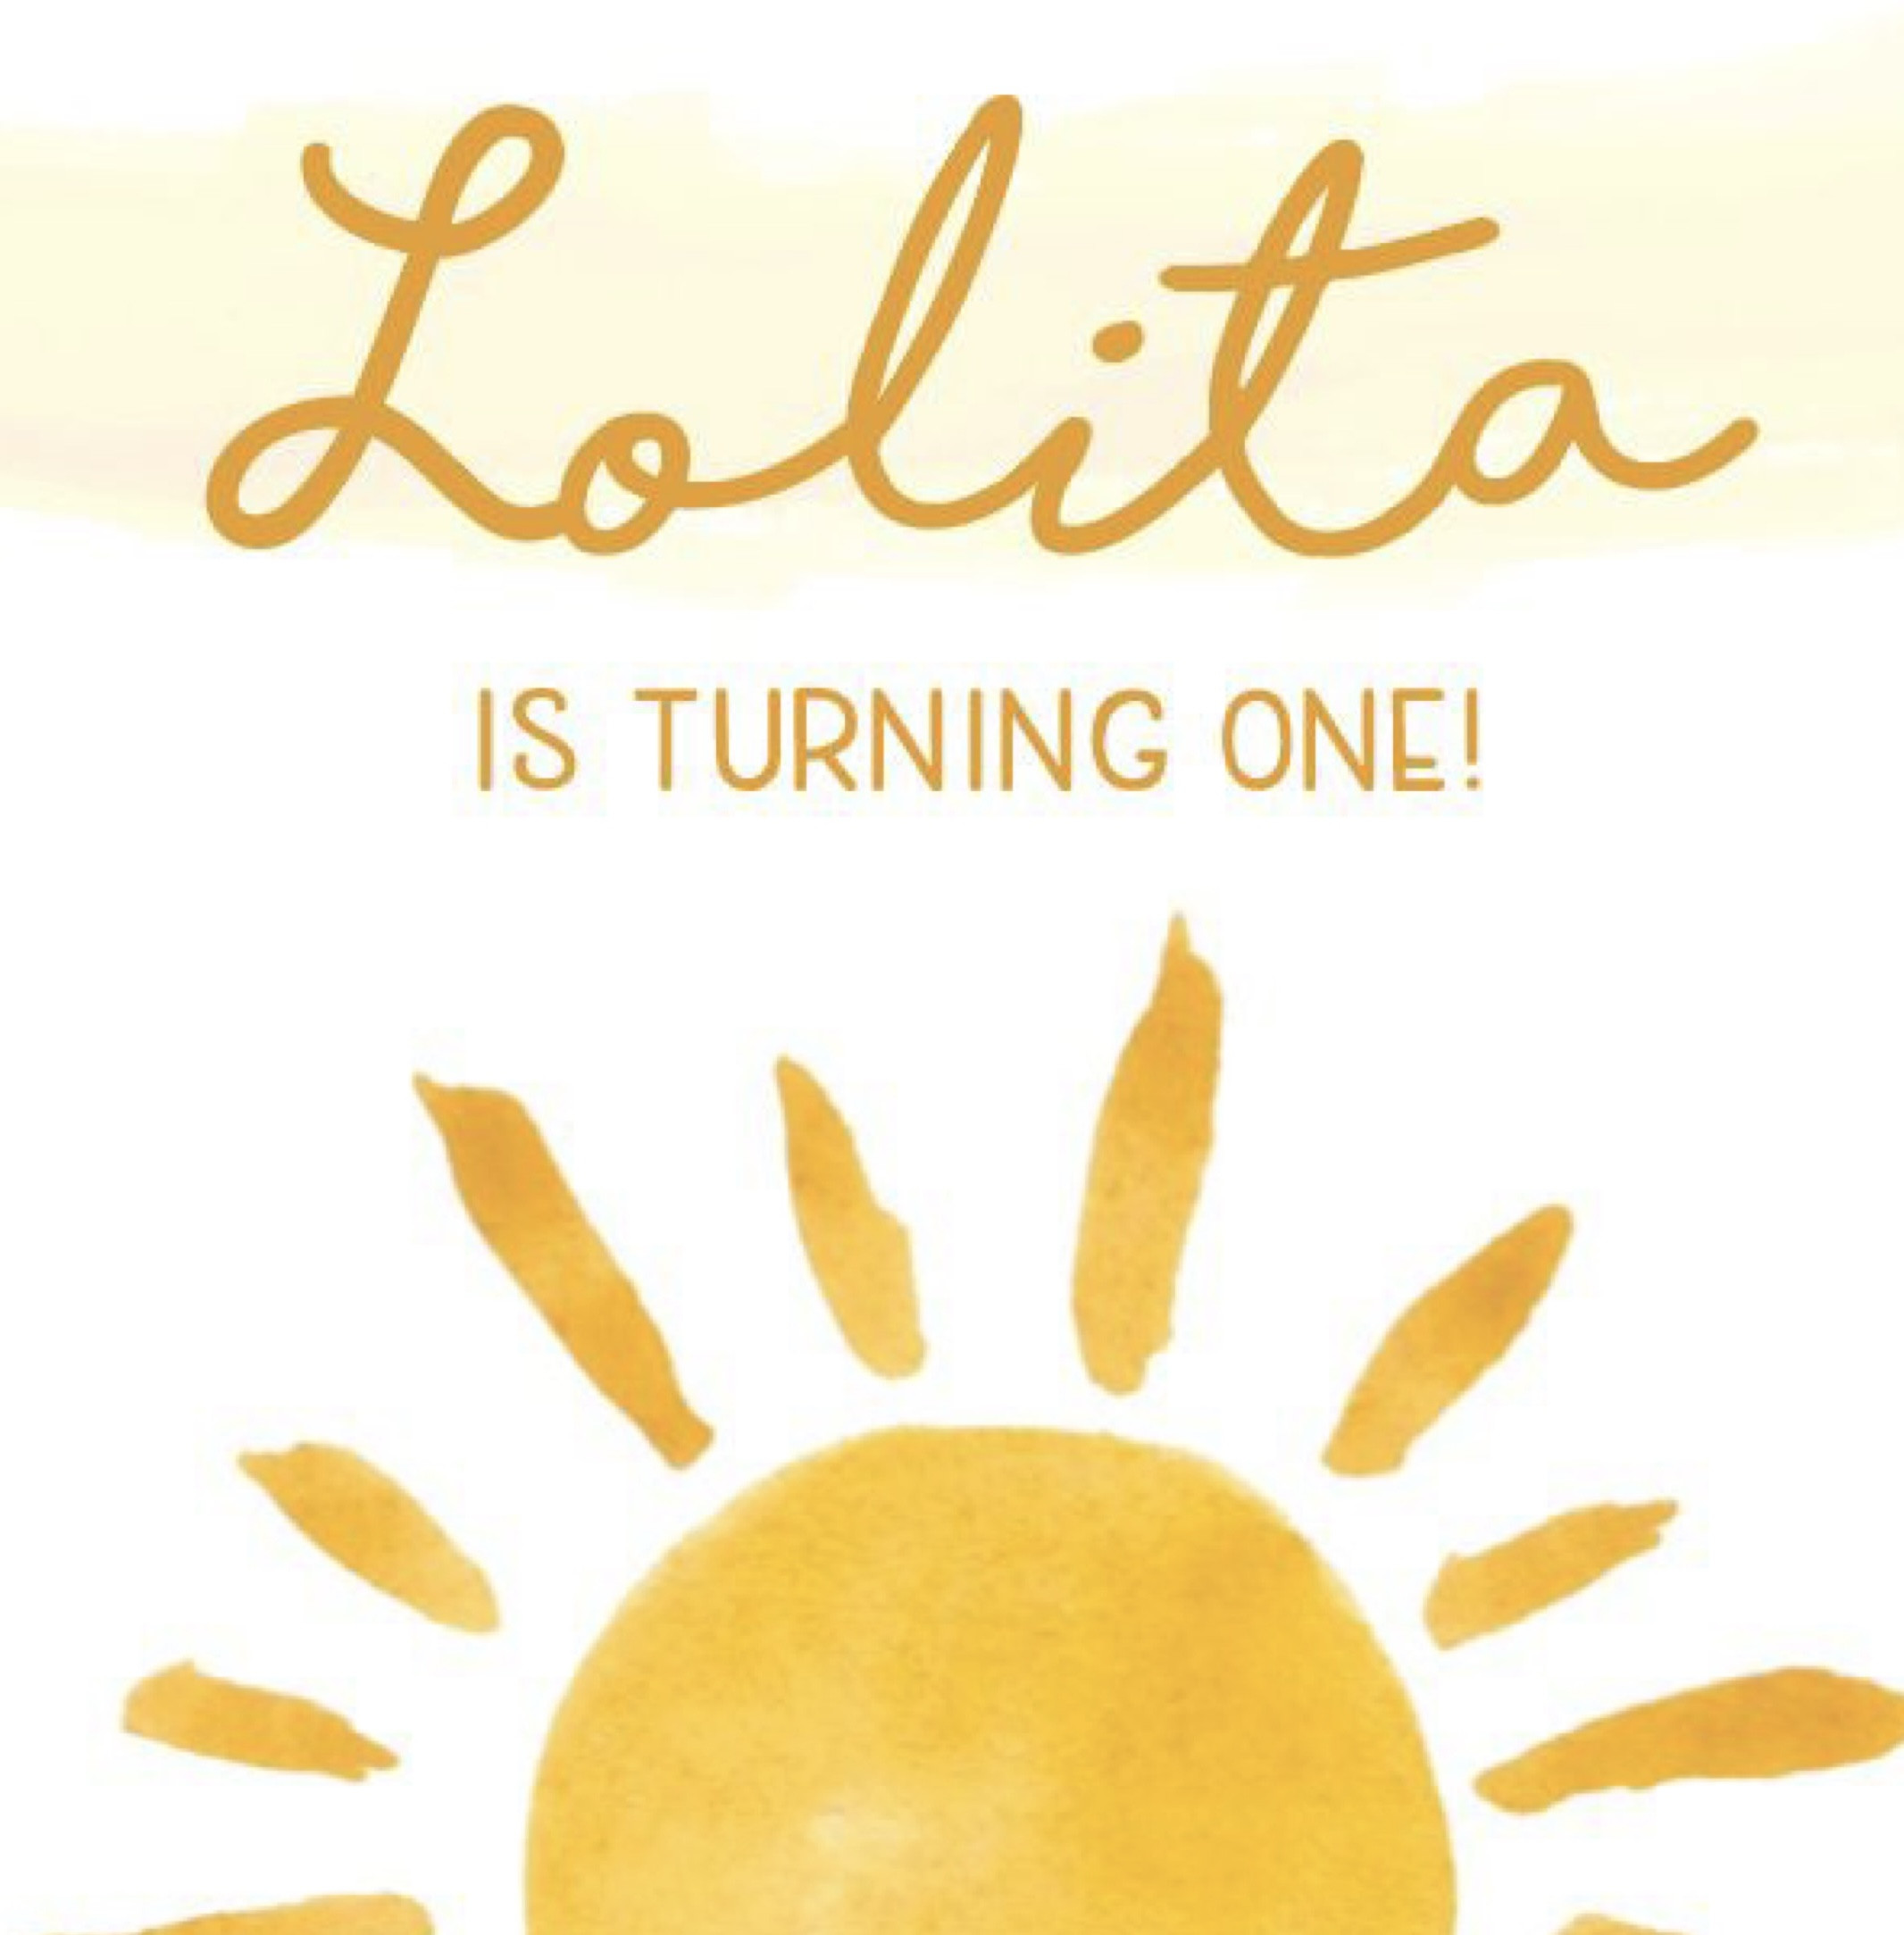 Lolita is ONE